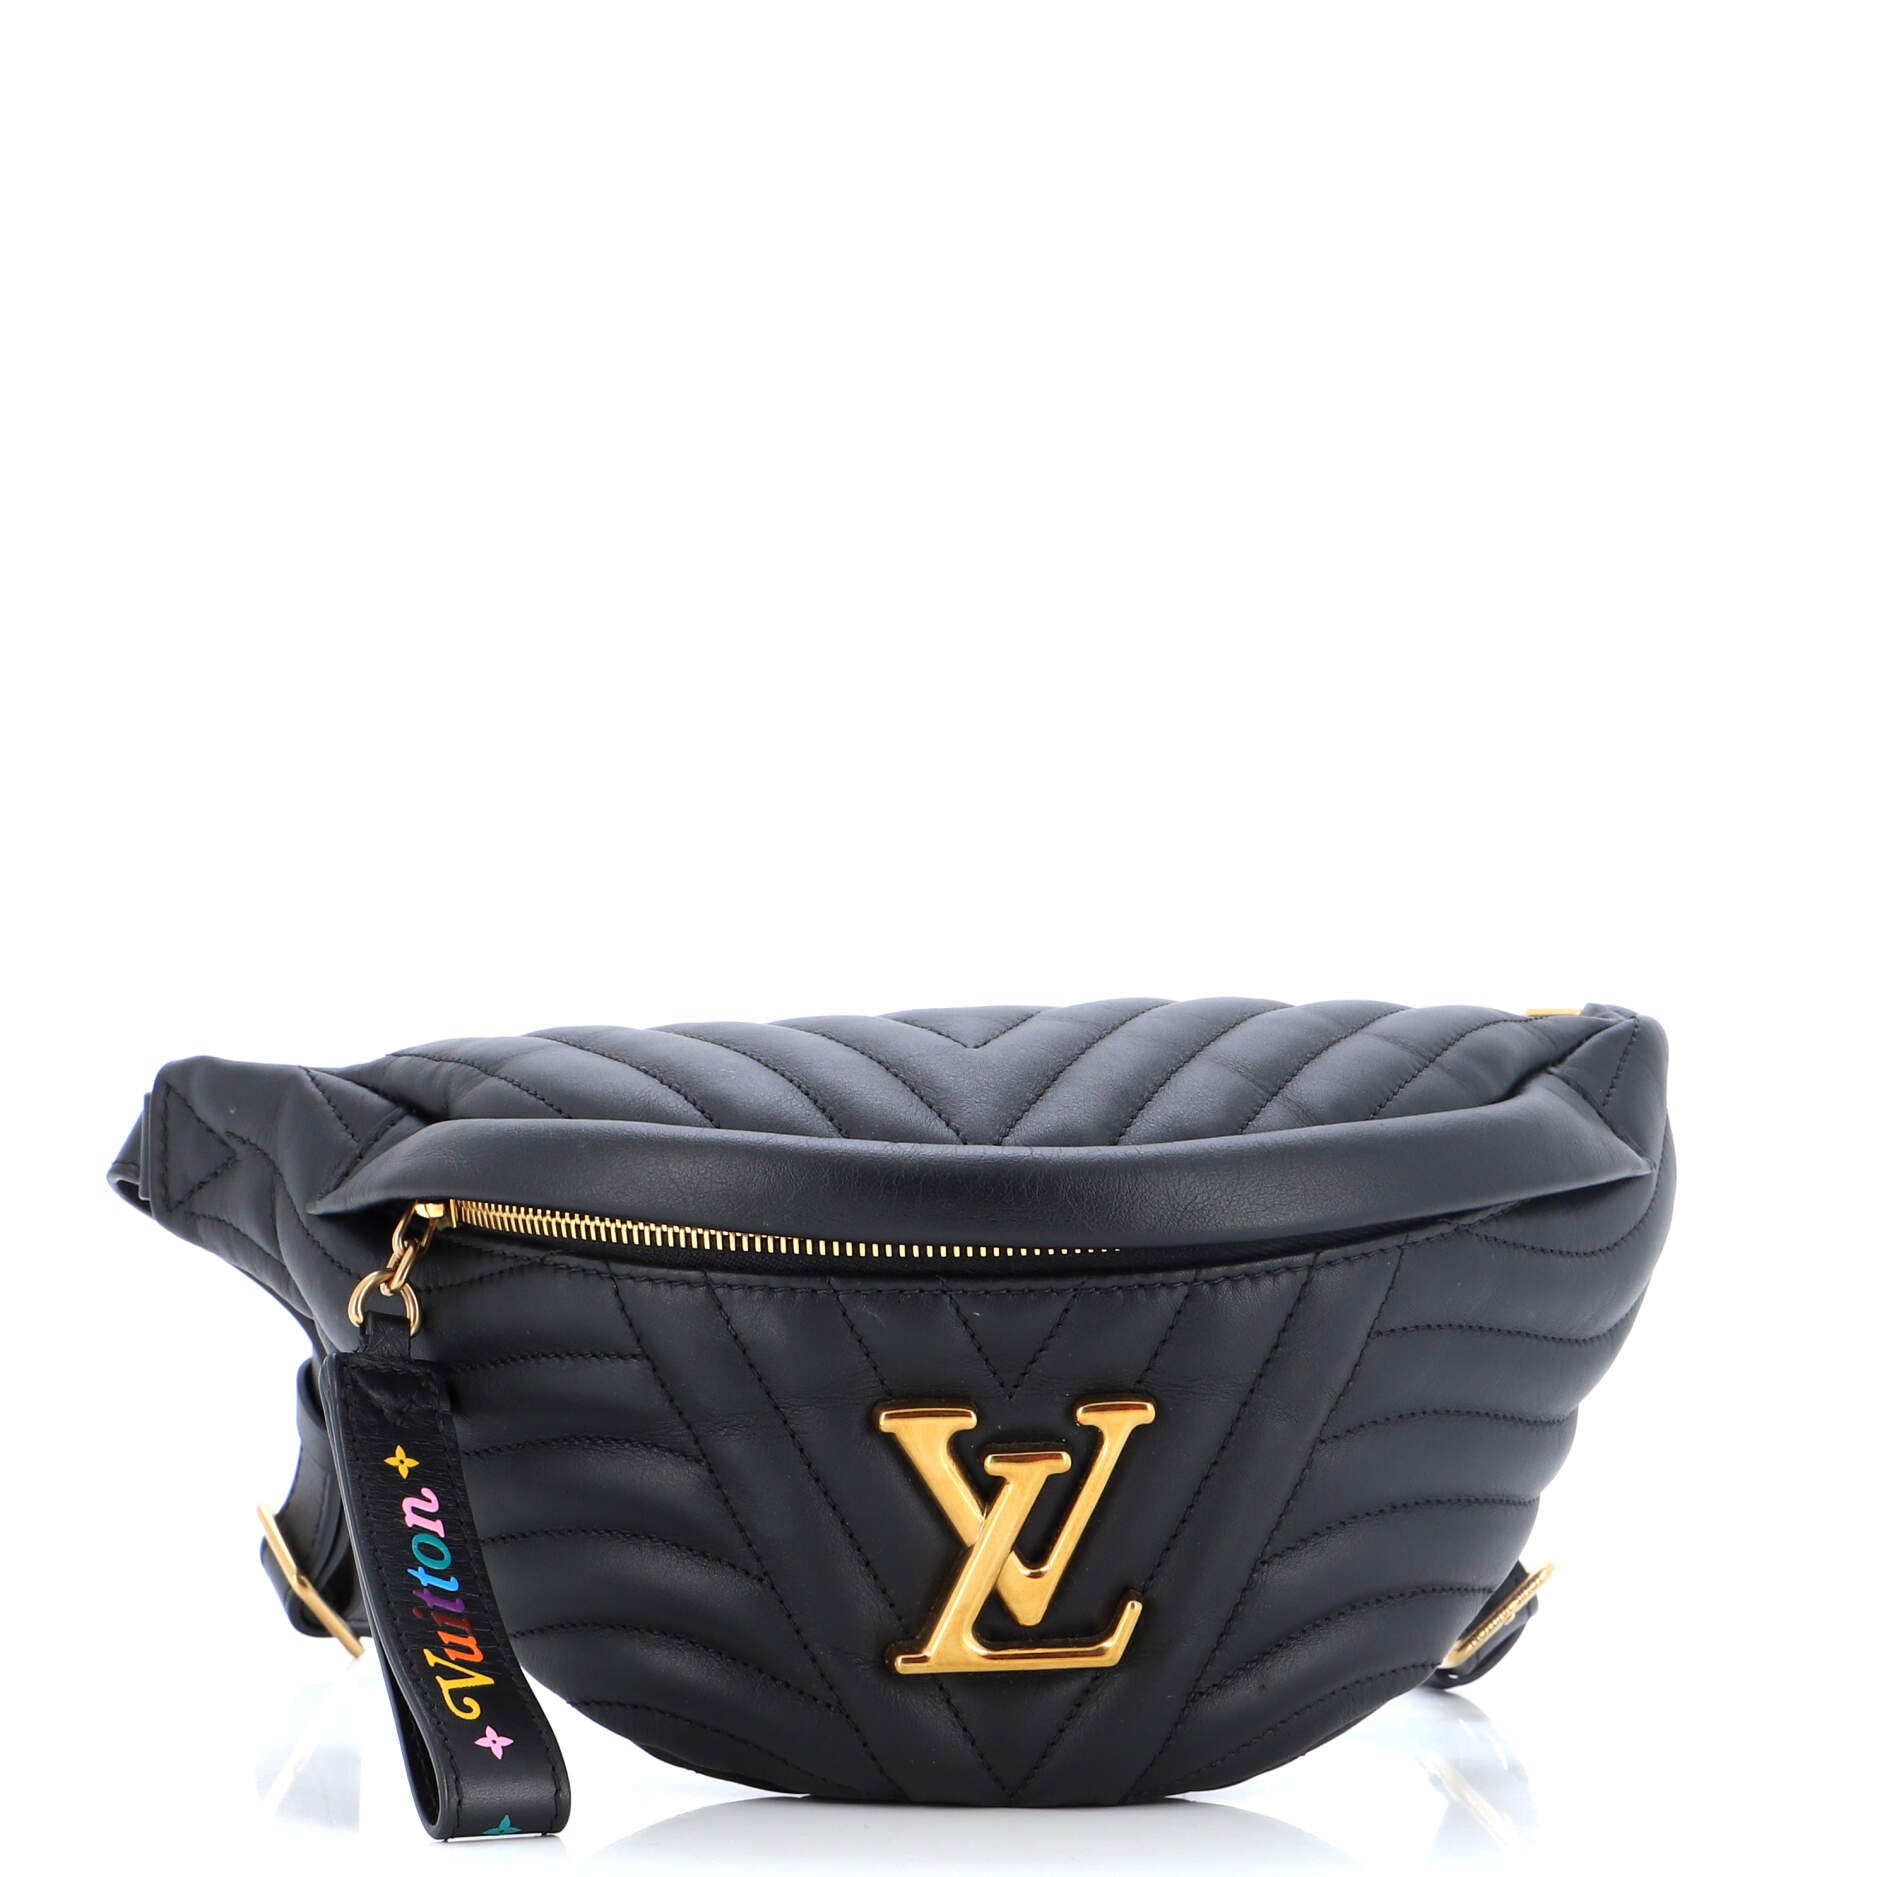 New Wave Bumbag Quilted Leather